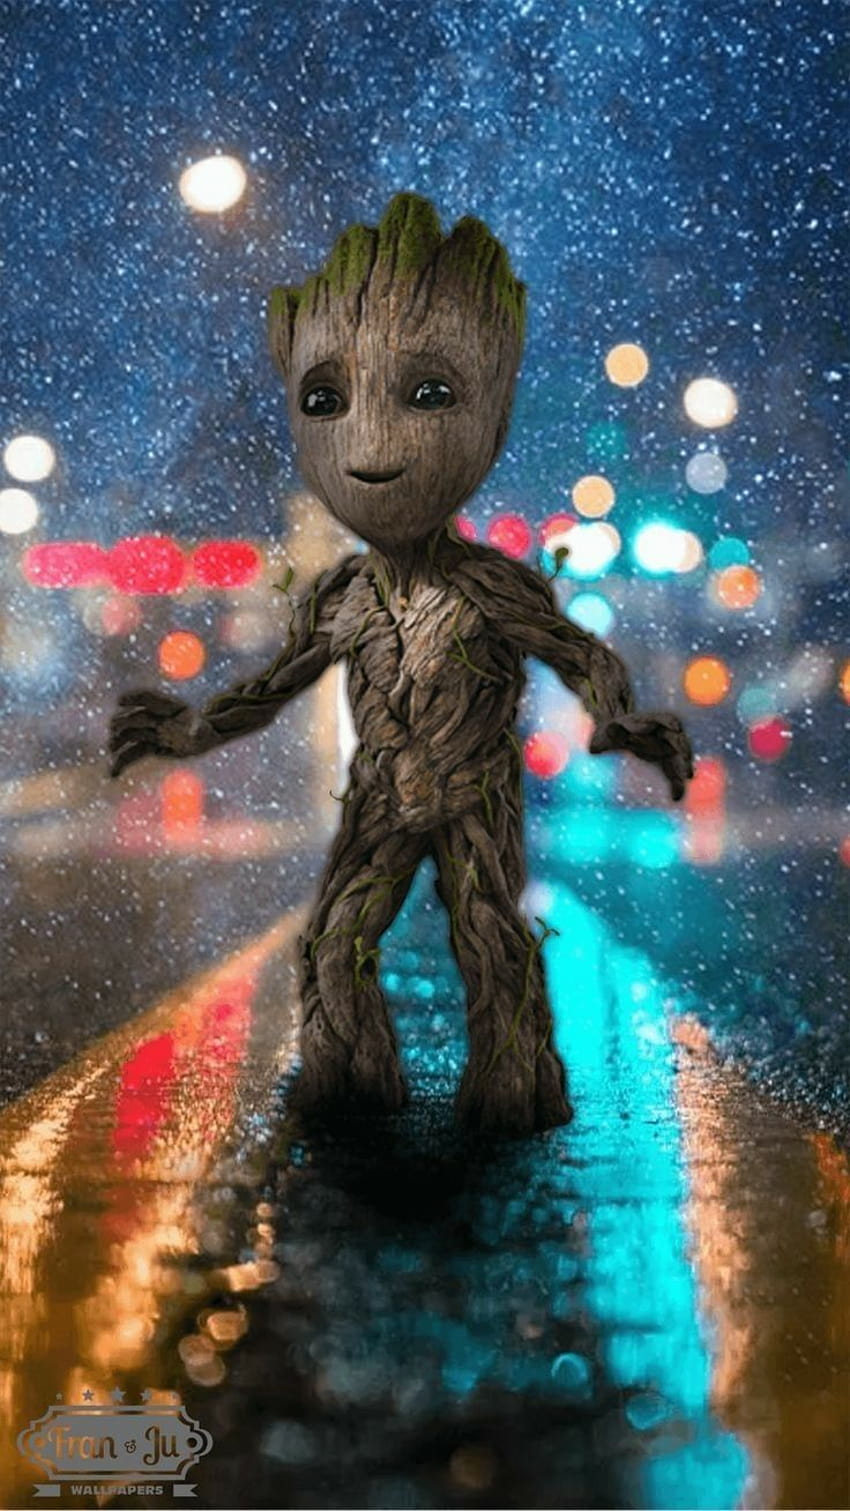 Violet on marvel, cute baby groot guardians of the galaxy HD phone wallpaper